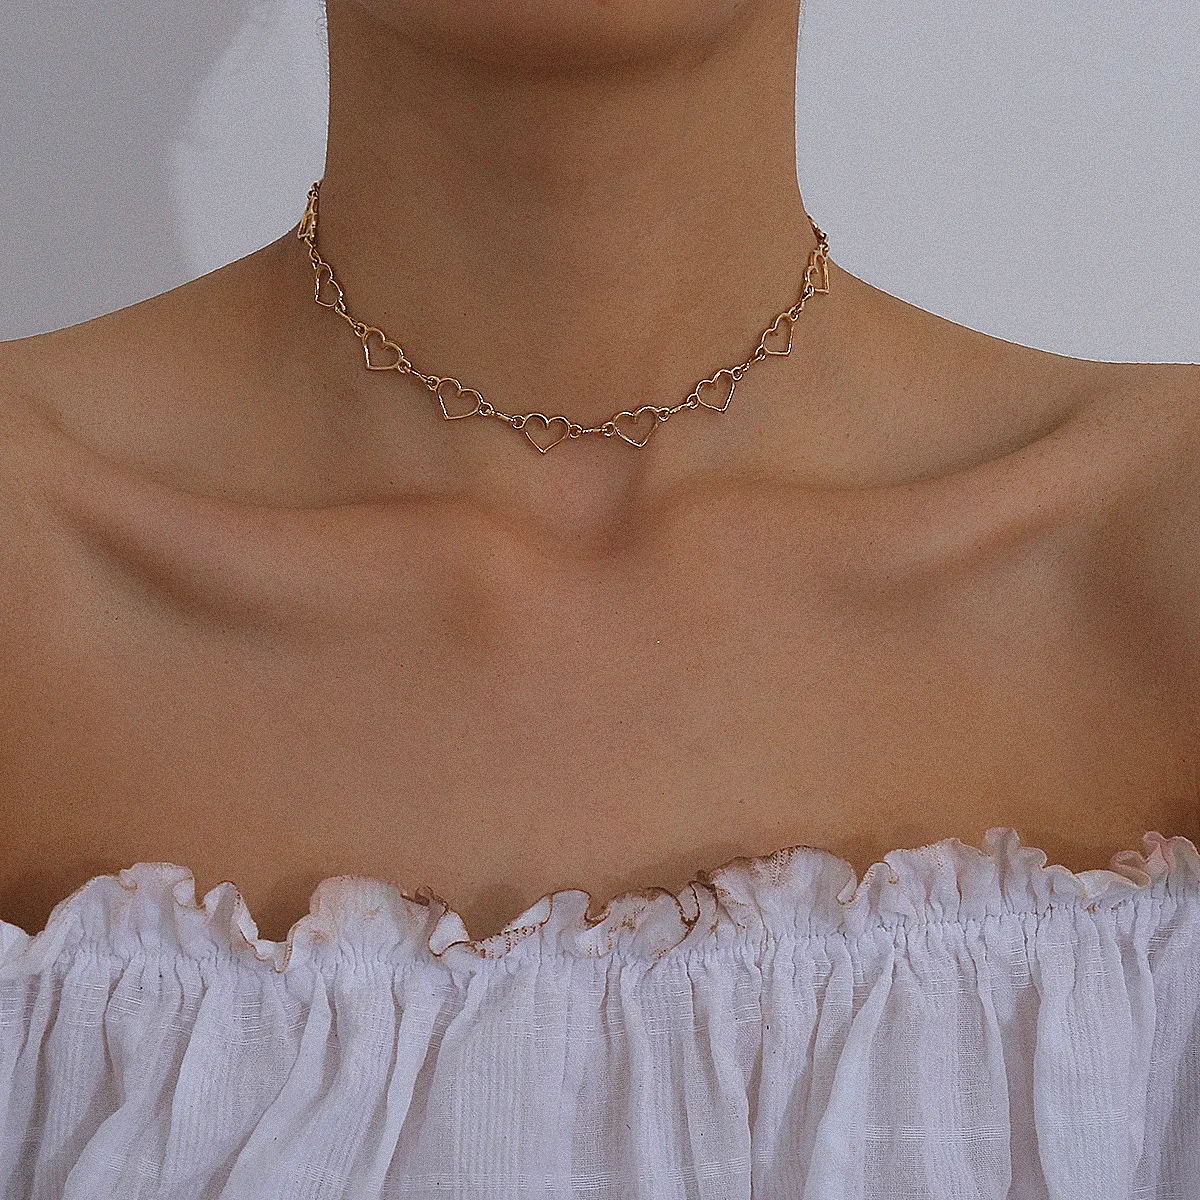 telefon køre Forkortelse Wholesale SHIXIN Fashion Choker Necklace Slender Clavicle Chain Barbed Wire  Hollow Heart Necklace for Women GirlfriendAccessories Jewelry New arrival  From m.alibaba.com